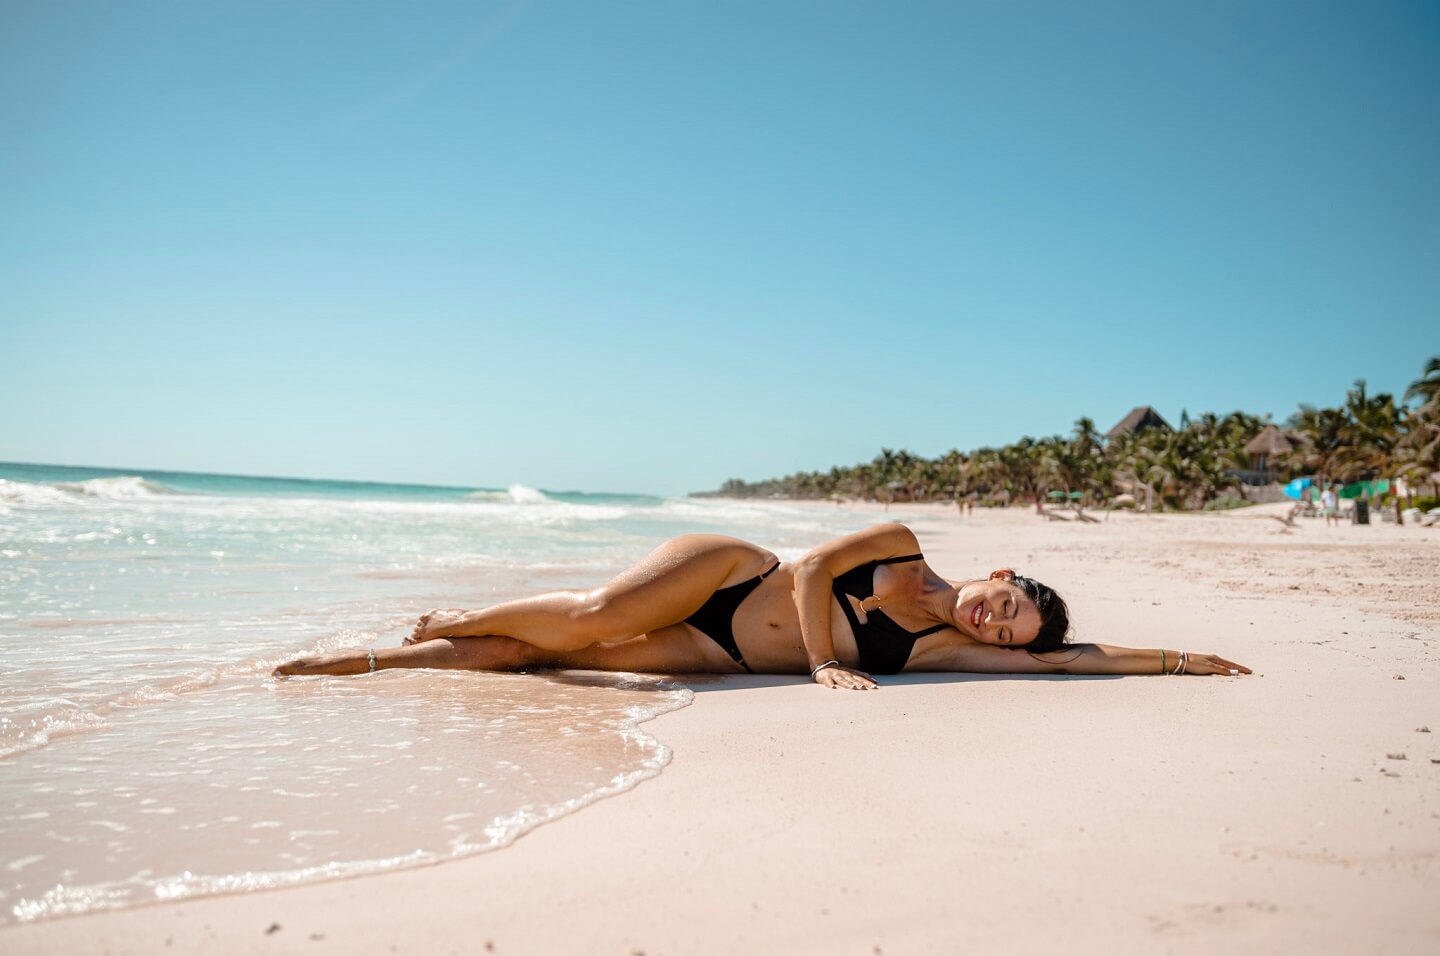 25 Flattering And Sexy Swimsuit Poses To Try For Instagram | Preview.ph